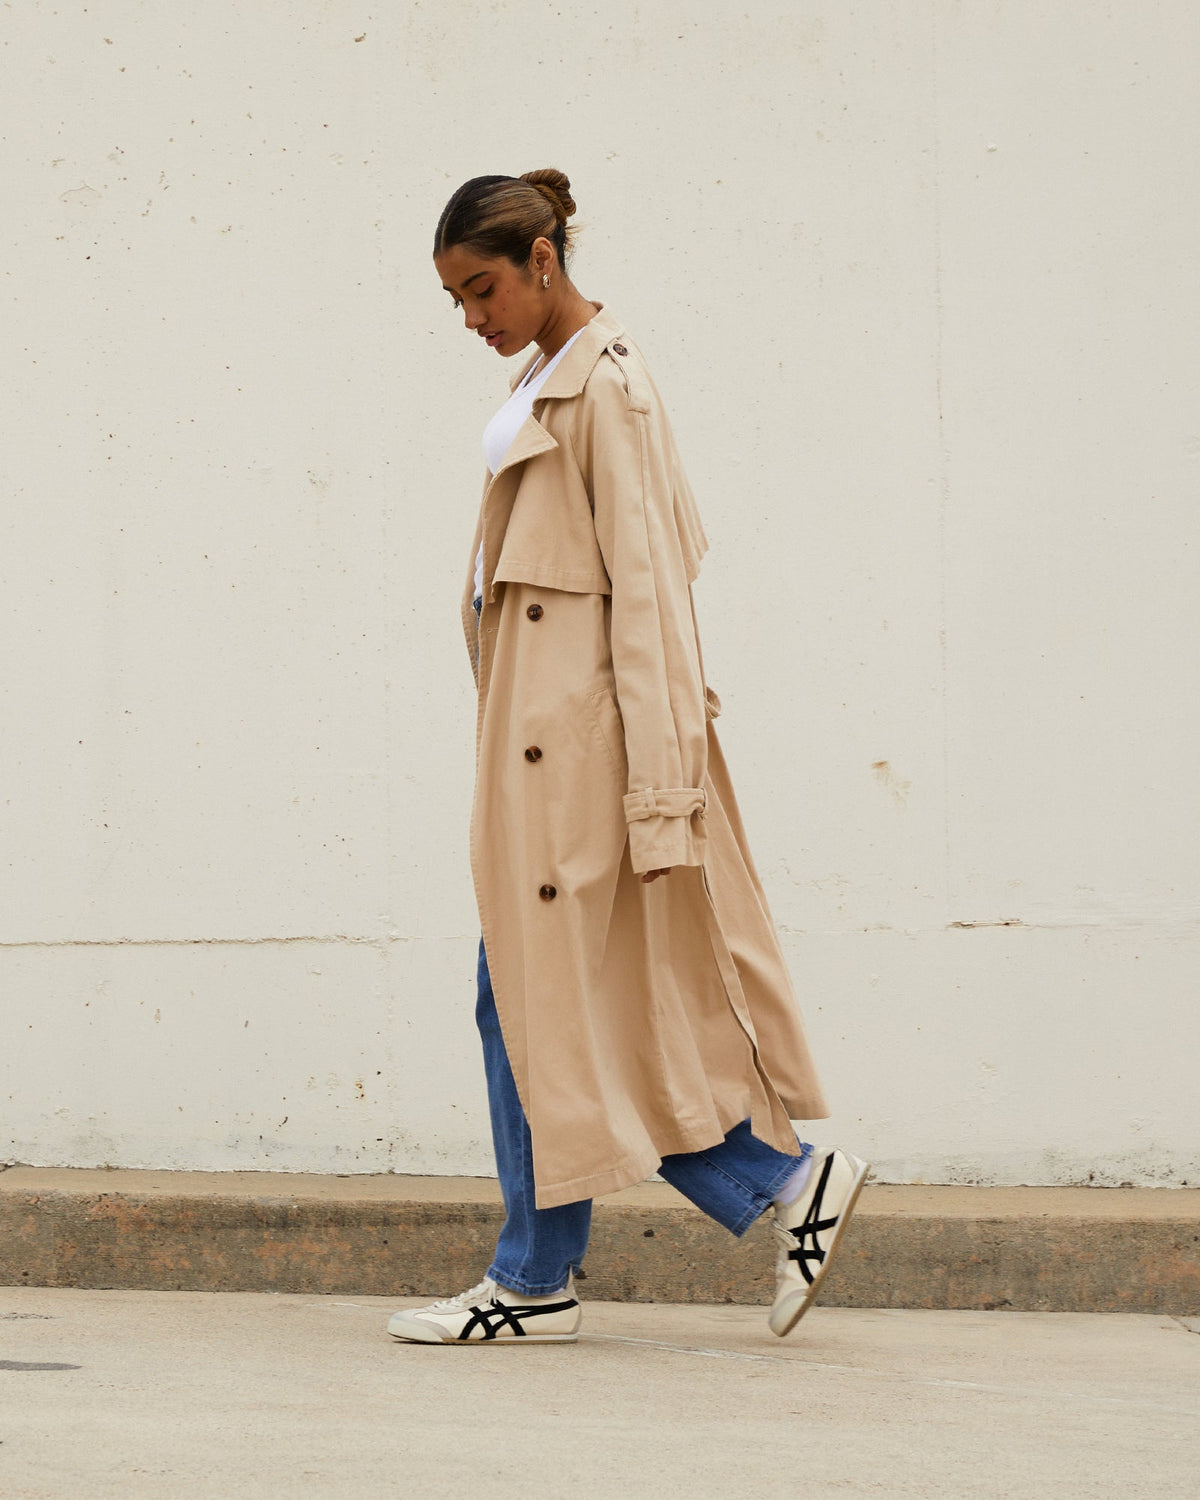 All About Eve-Eve Trench Coat Tan-Edge Clothing